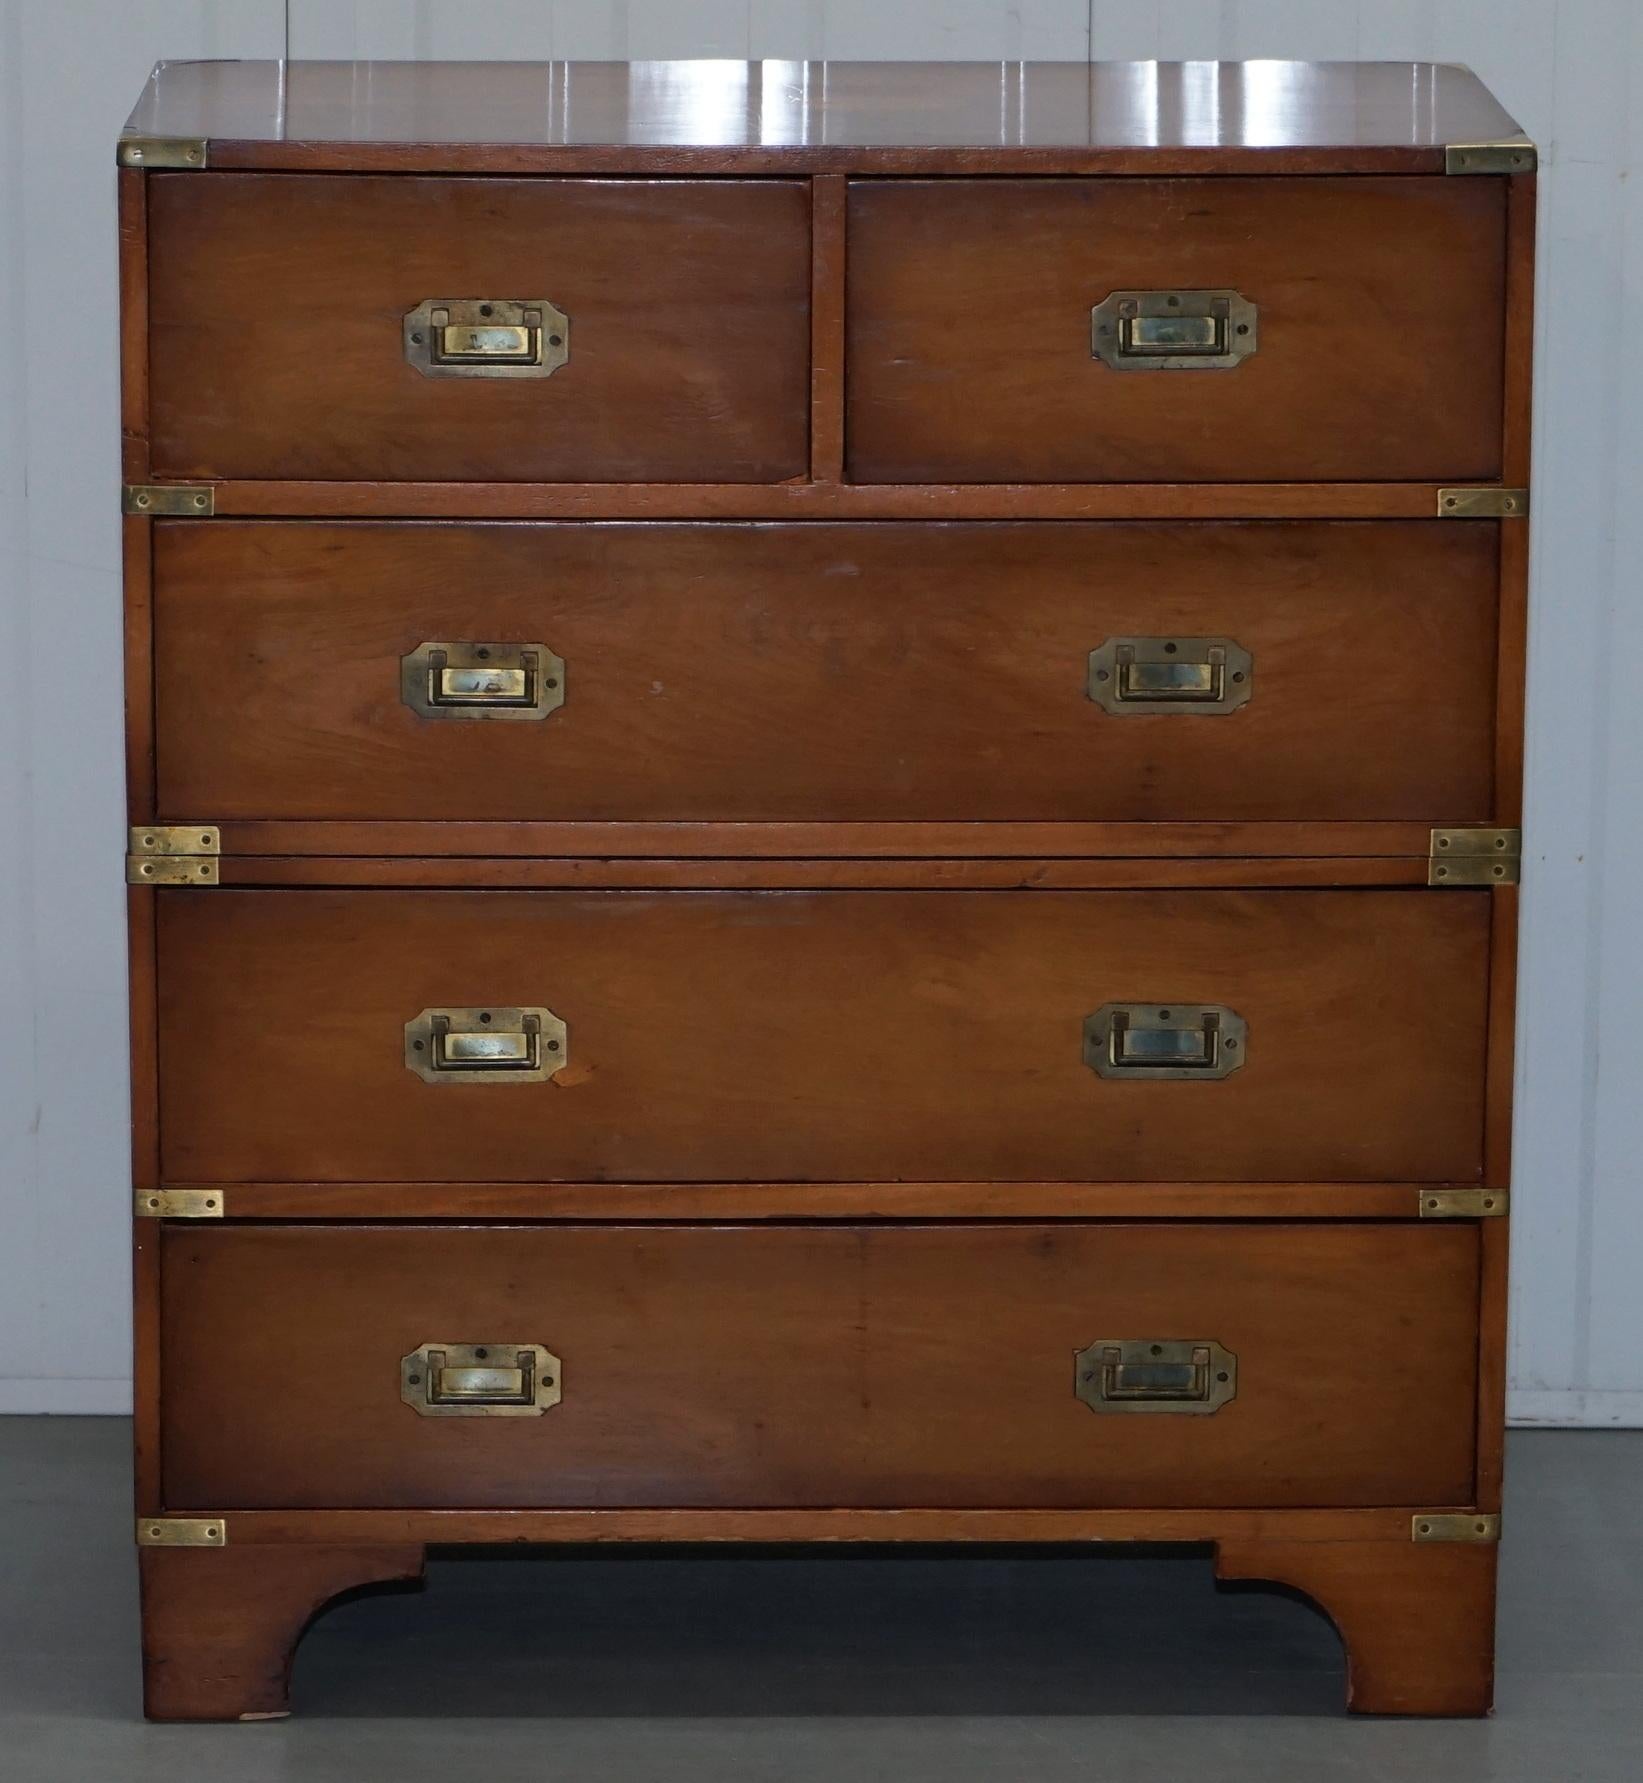 We are delighted to offer for sale lovely original period Yew wood with brass fittings Campaign Military chest of drawers

A good looking and decorative chest of drawers, made in the Campaign style, the drawers split into two easy to transport